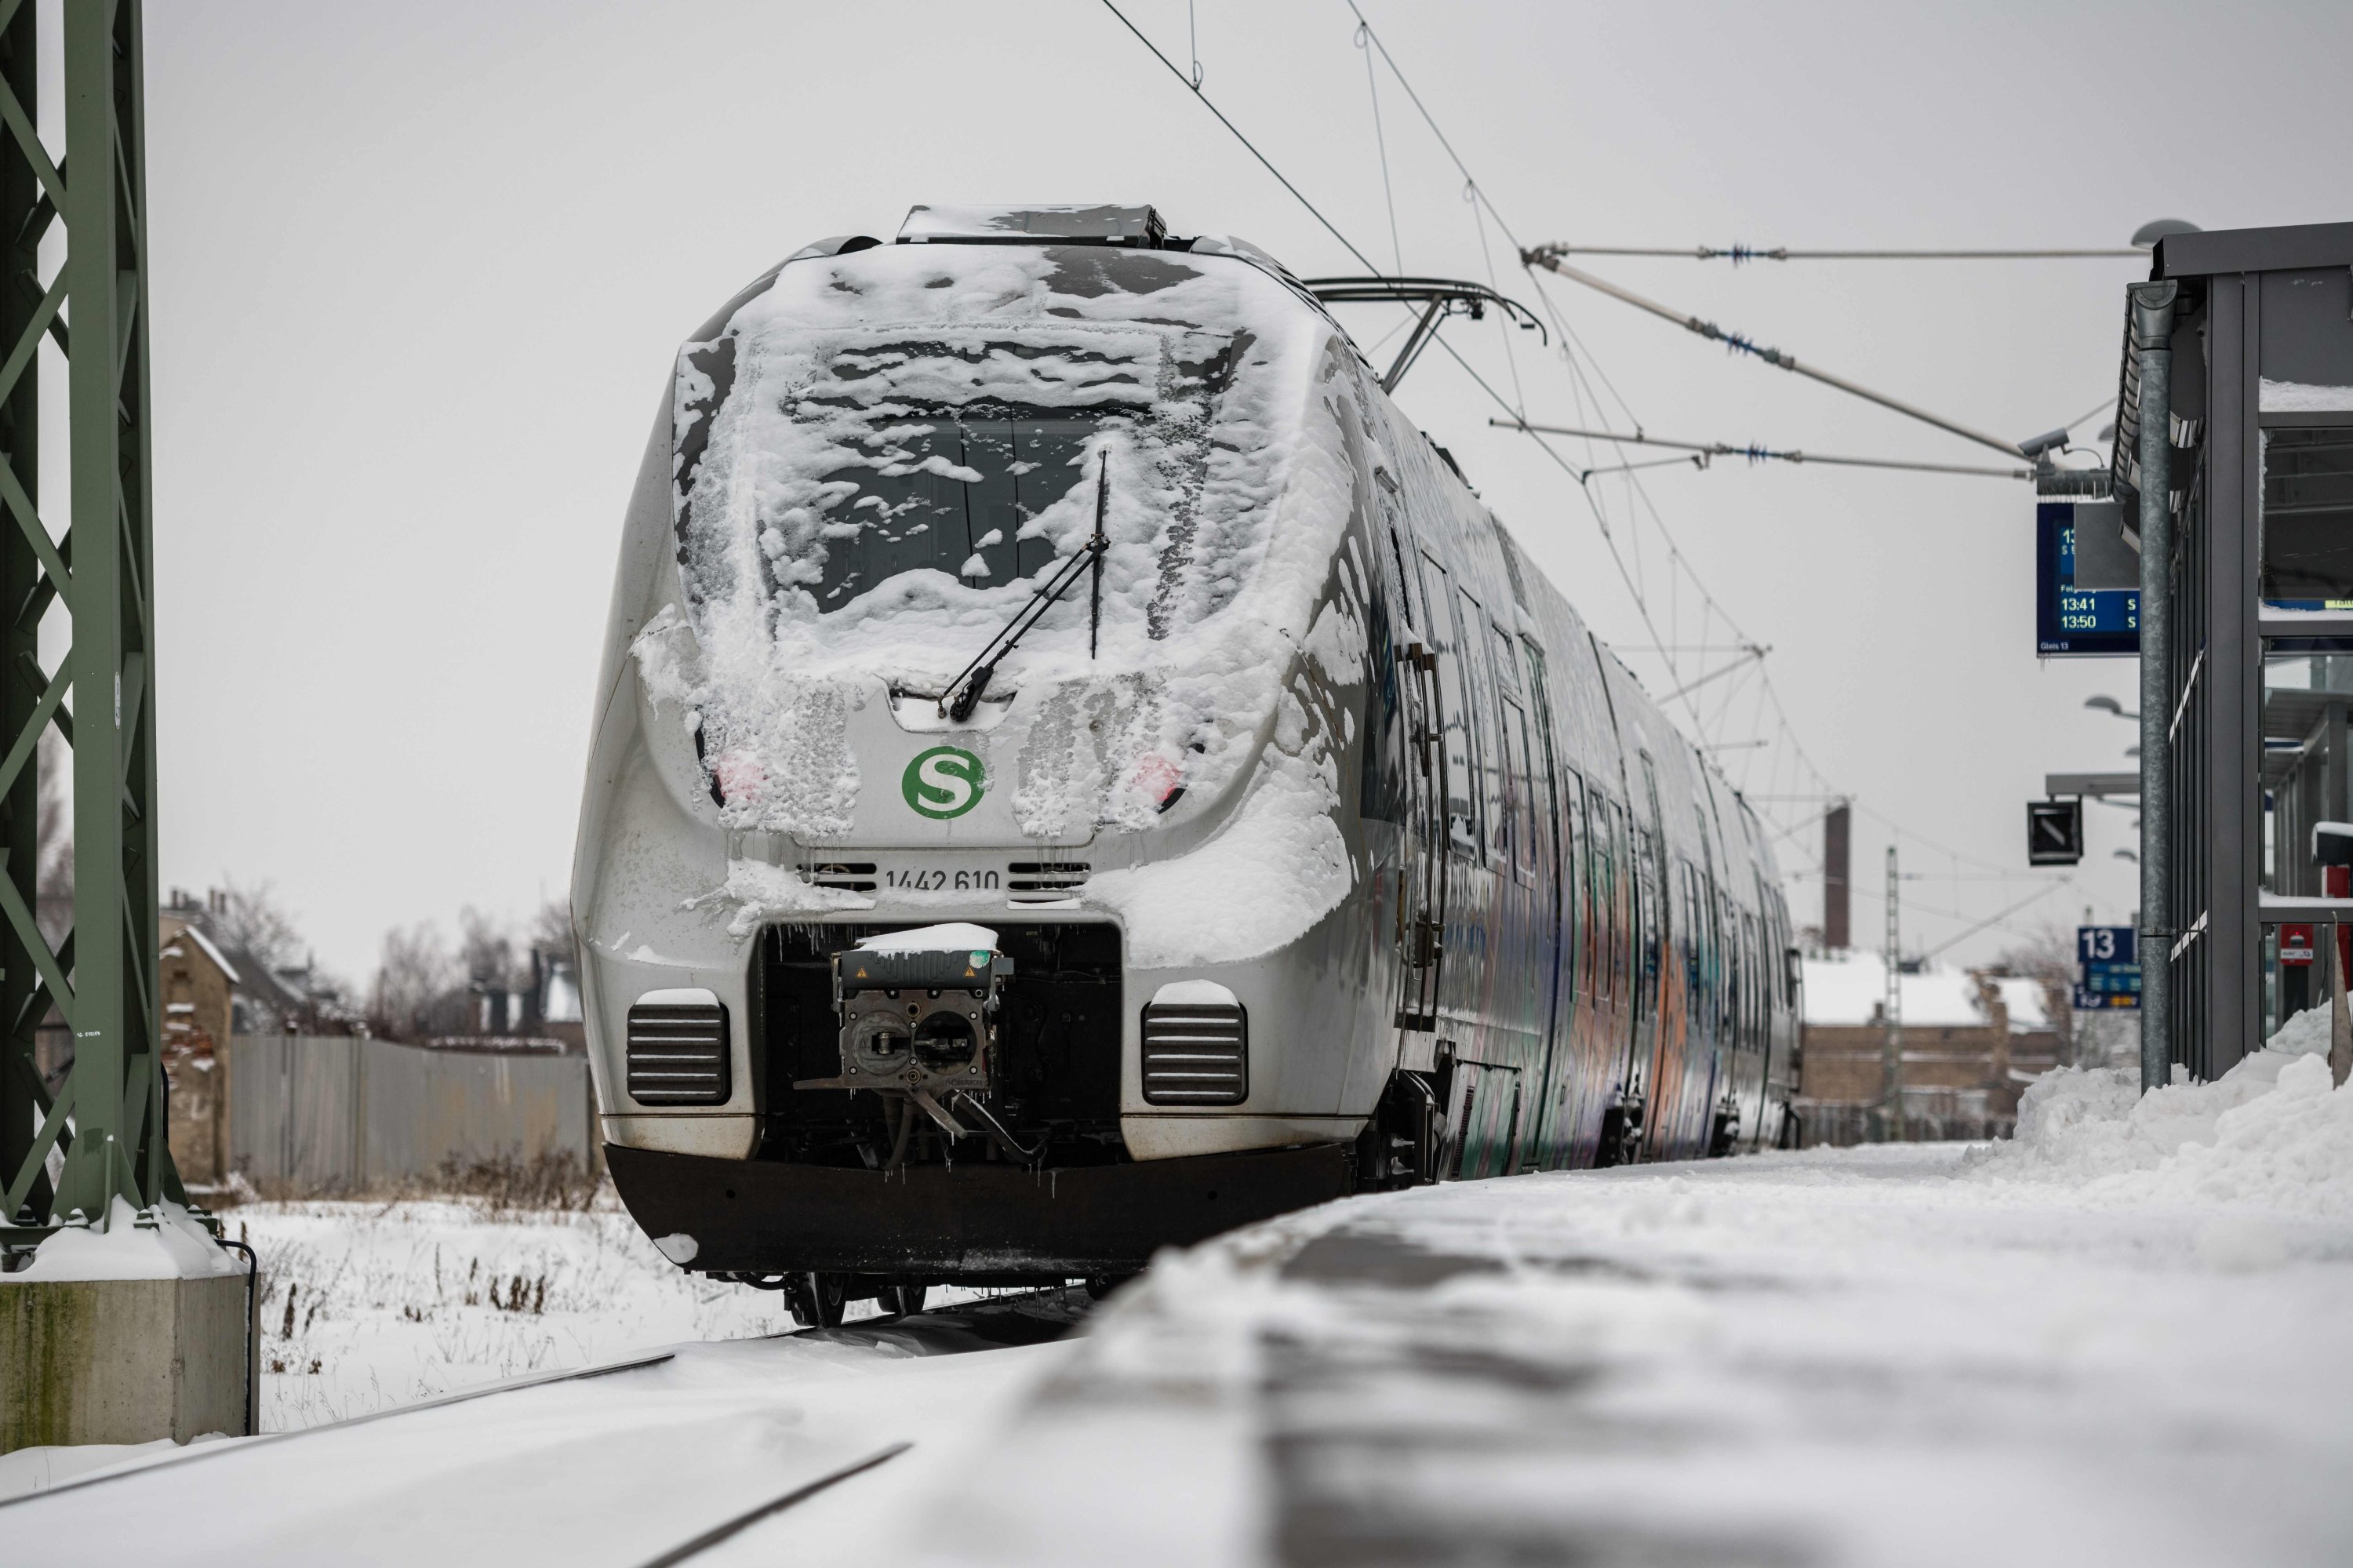 A snow-covered regional train stands on a platform at the central train station in Halle/Saale, eastern Germany, on January 07, 2021. (AFP Photo)